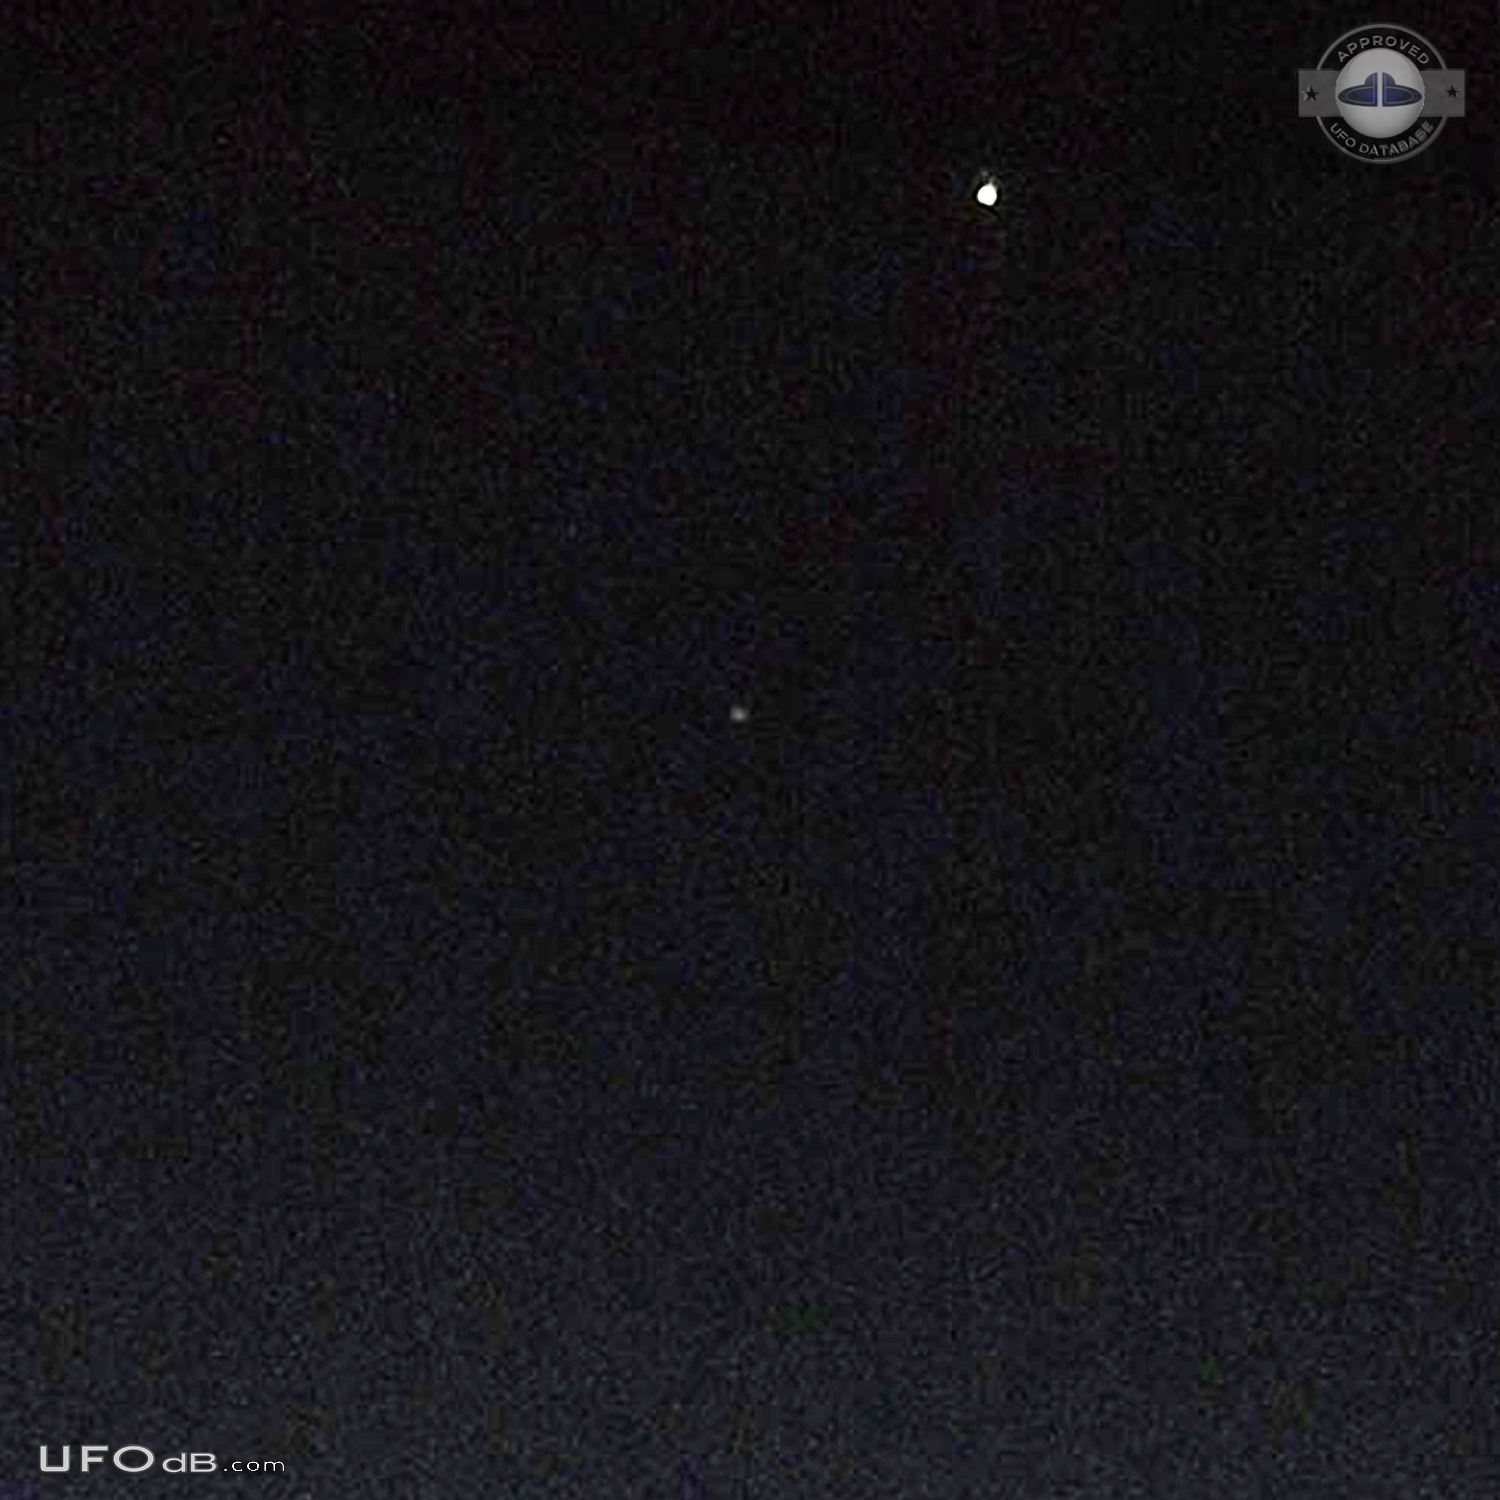 UFO first seen on 16 then seen again 17 oct 2015 - Providence Village  UFO Picture #733-2